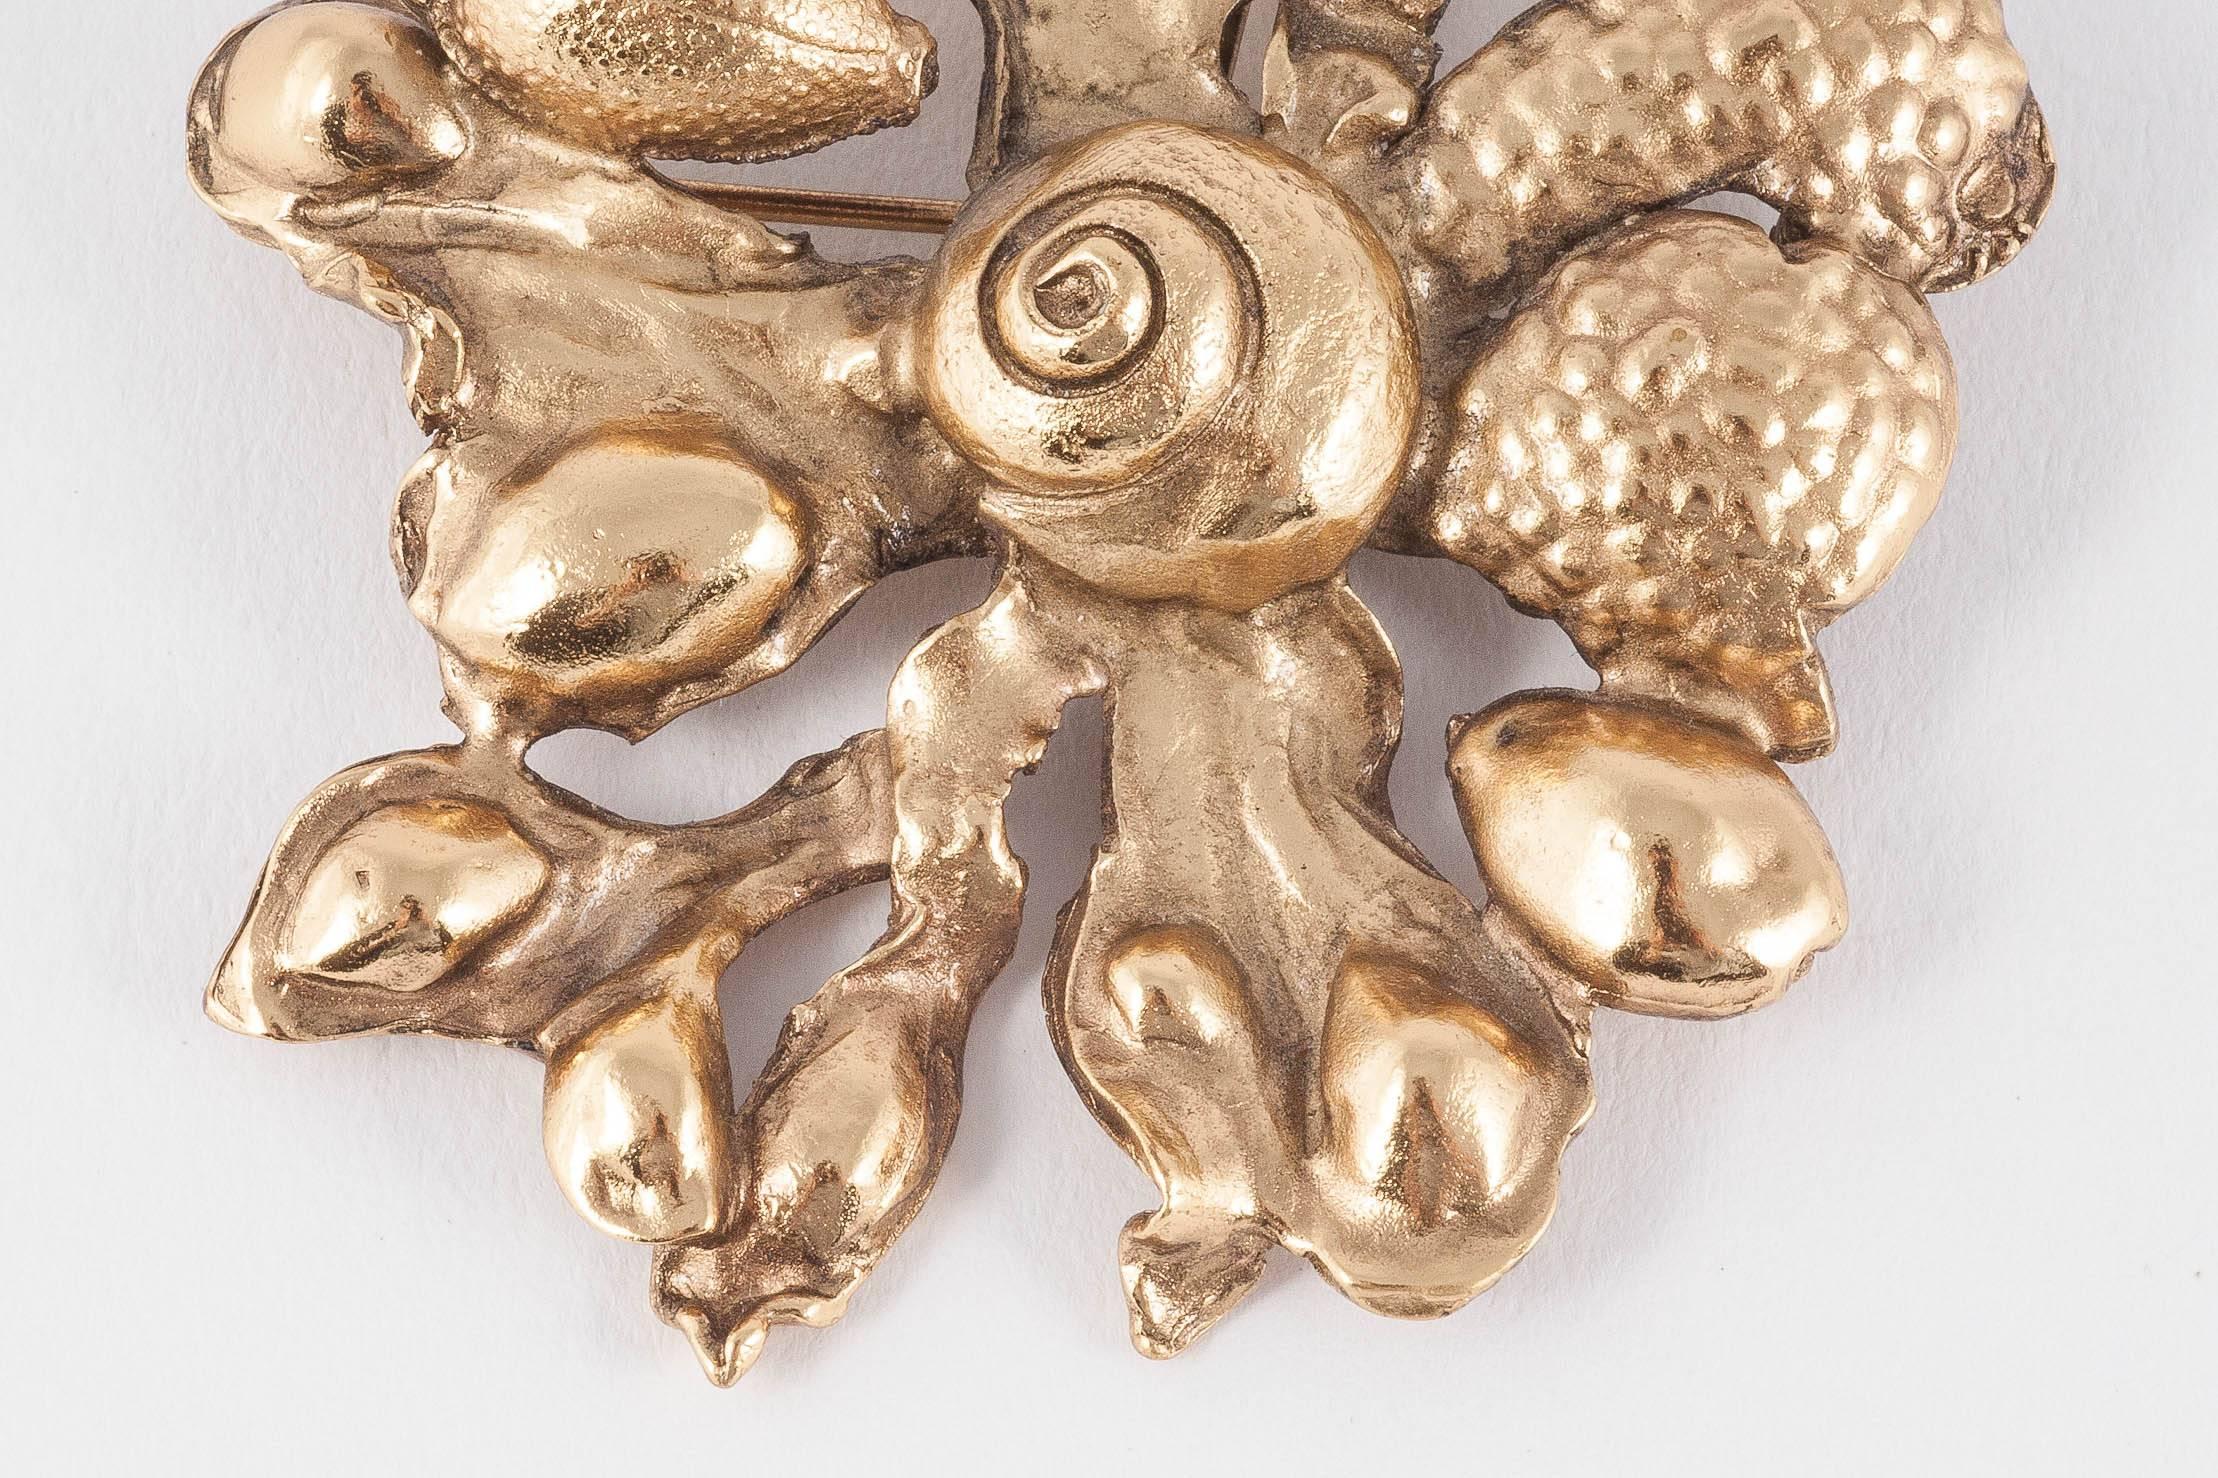 This fanciful brooch by famous Parisian parurier Goossens is a great addition to any jewellery collection and looks stunning hooked over a rope of baroque pearls or glass beads. Super chic as a brooch on knitwear, jackets too. Own a mini sculpture